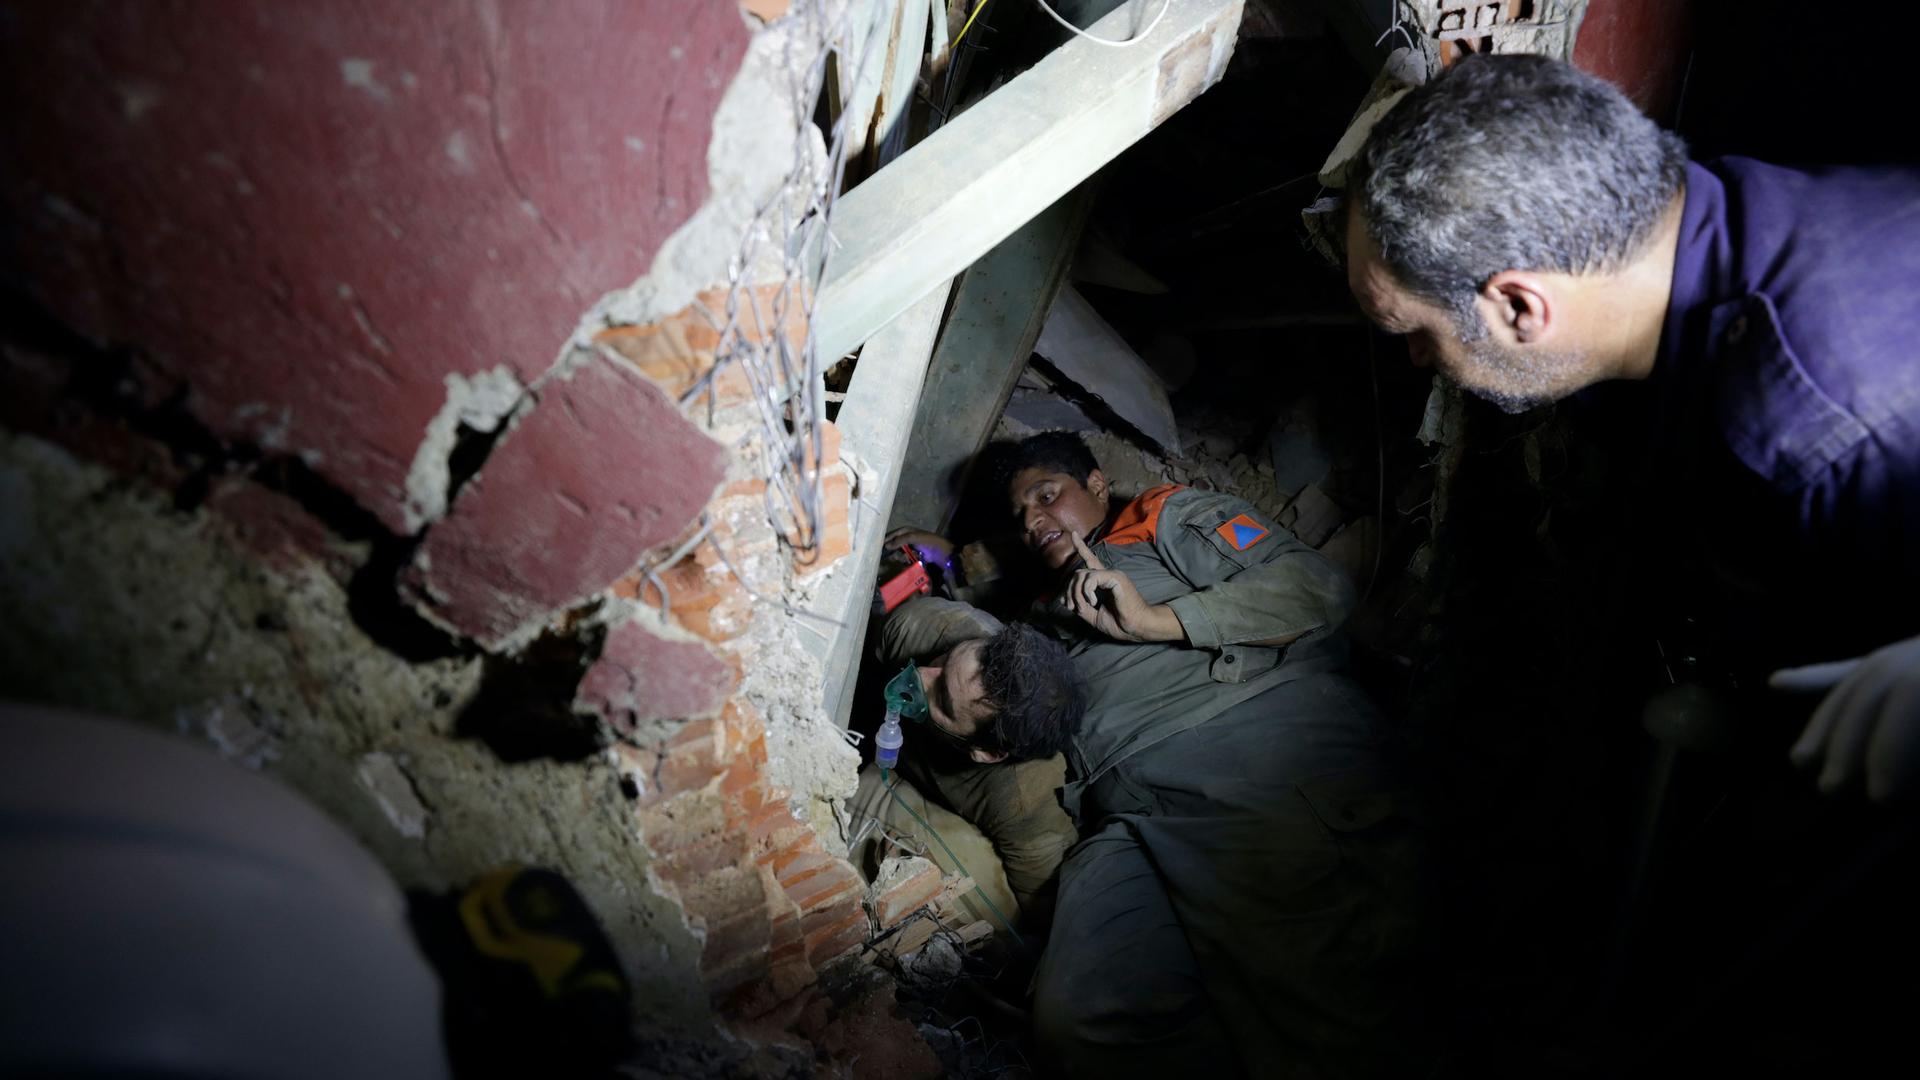 Several people are shown wearing military fatigues and digging through building rubble.